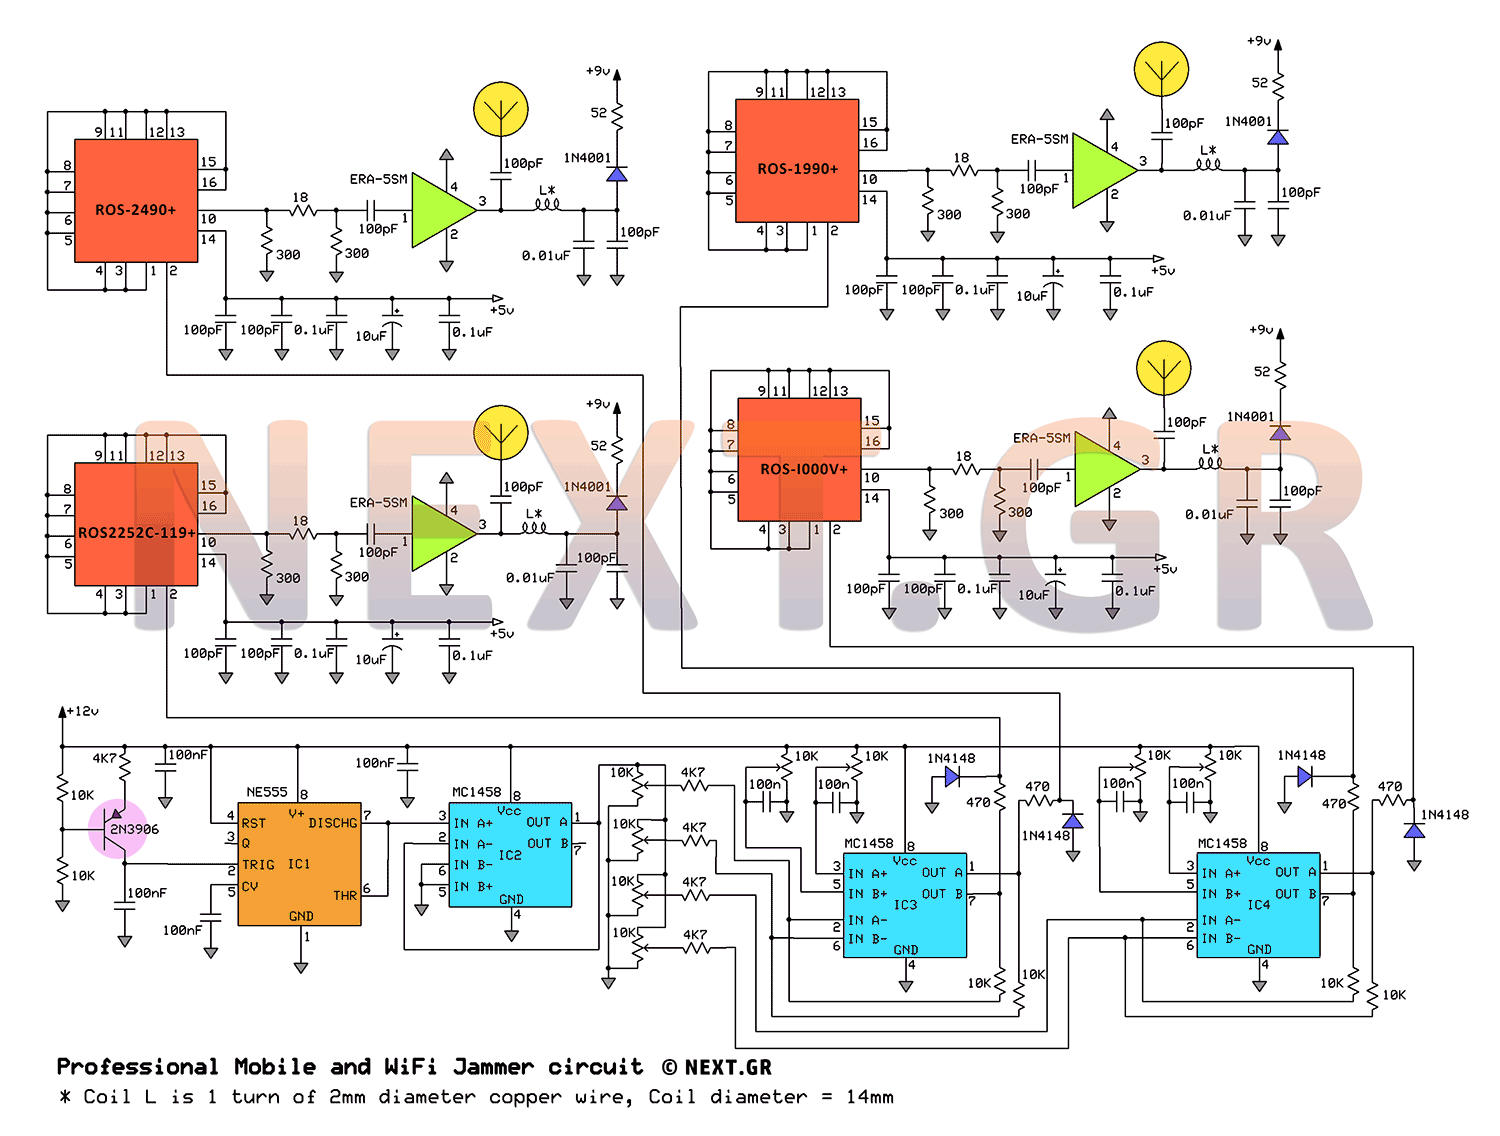 Professional Mobile (1G 2G 3G 4G) & WiFi Jammer Circuit